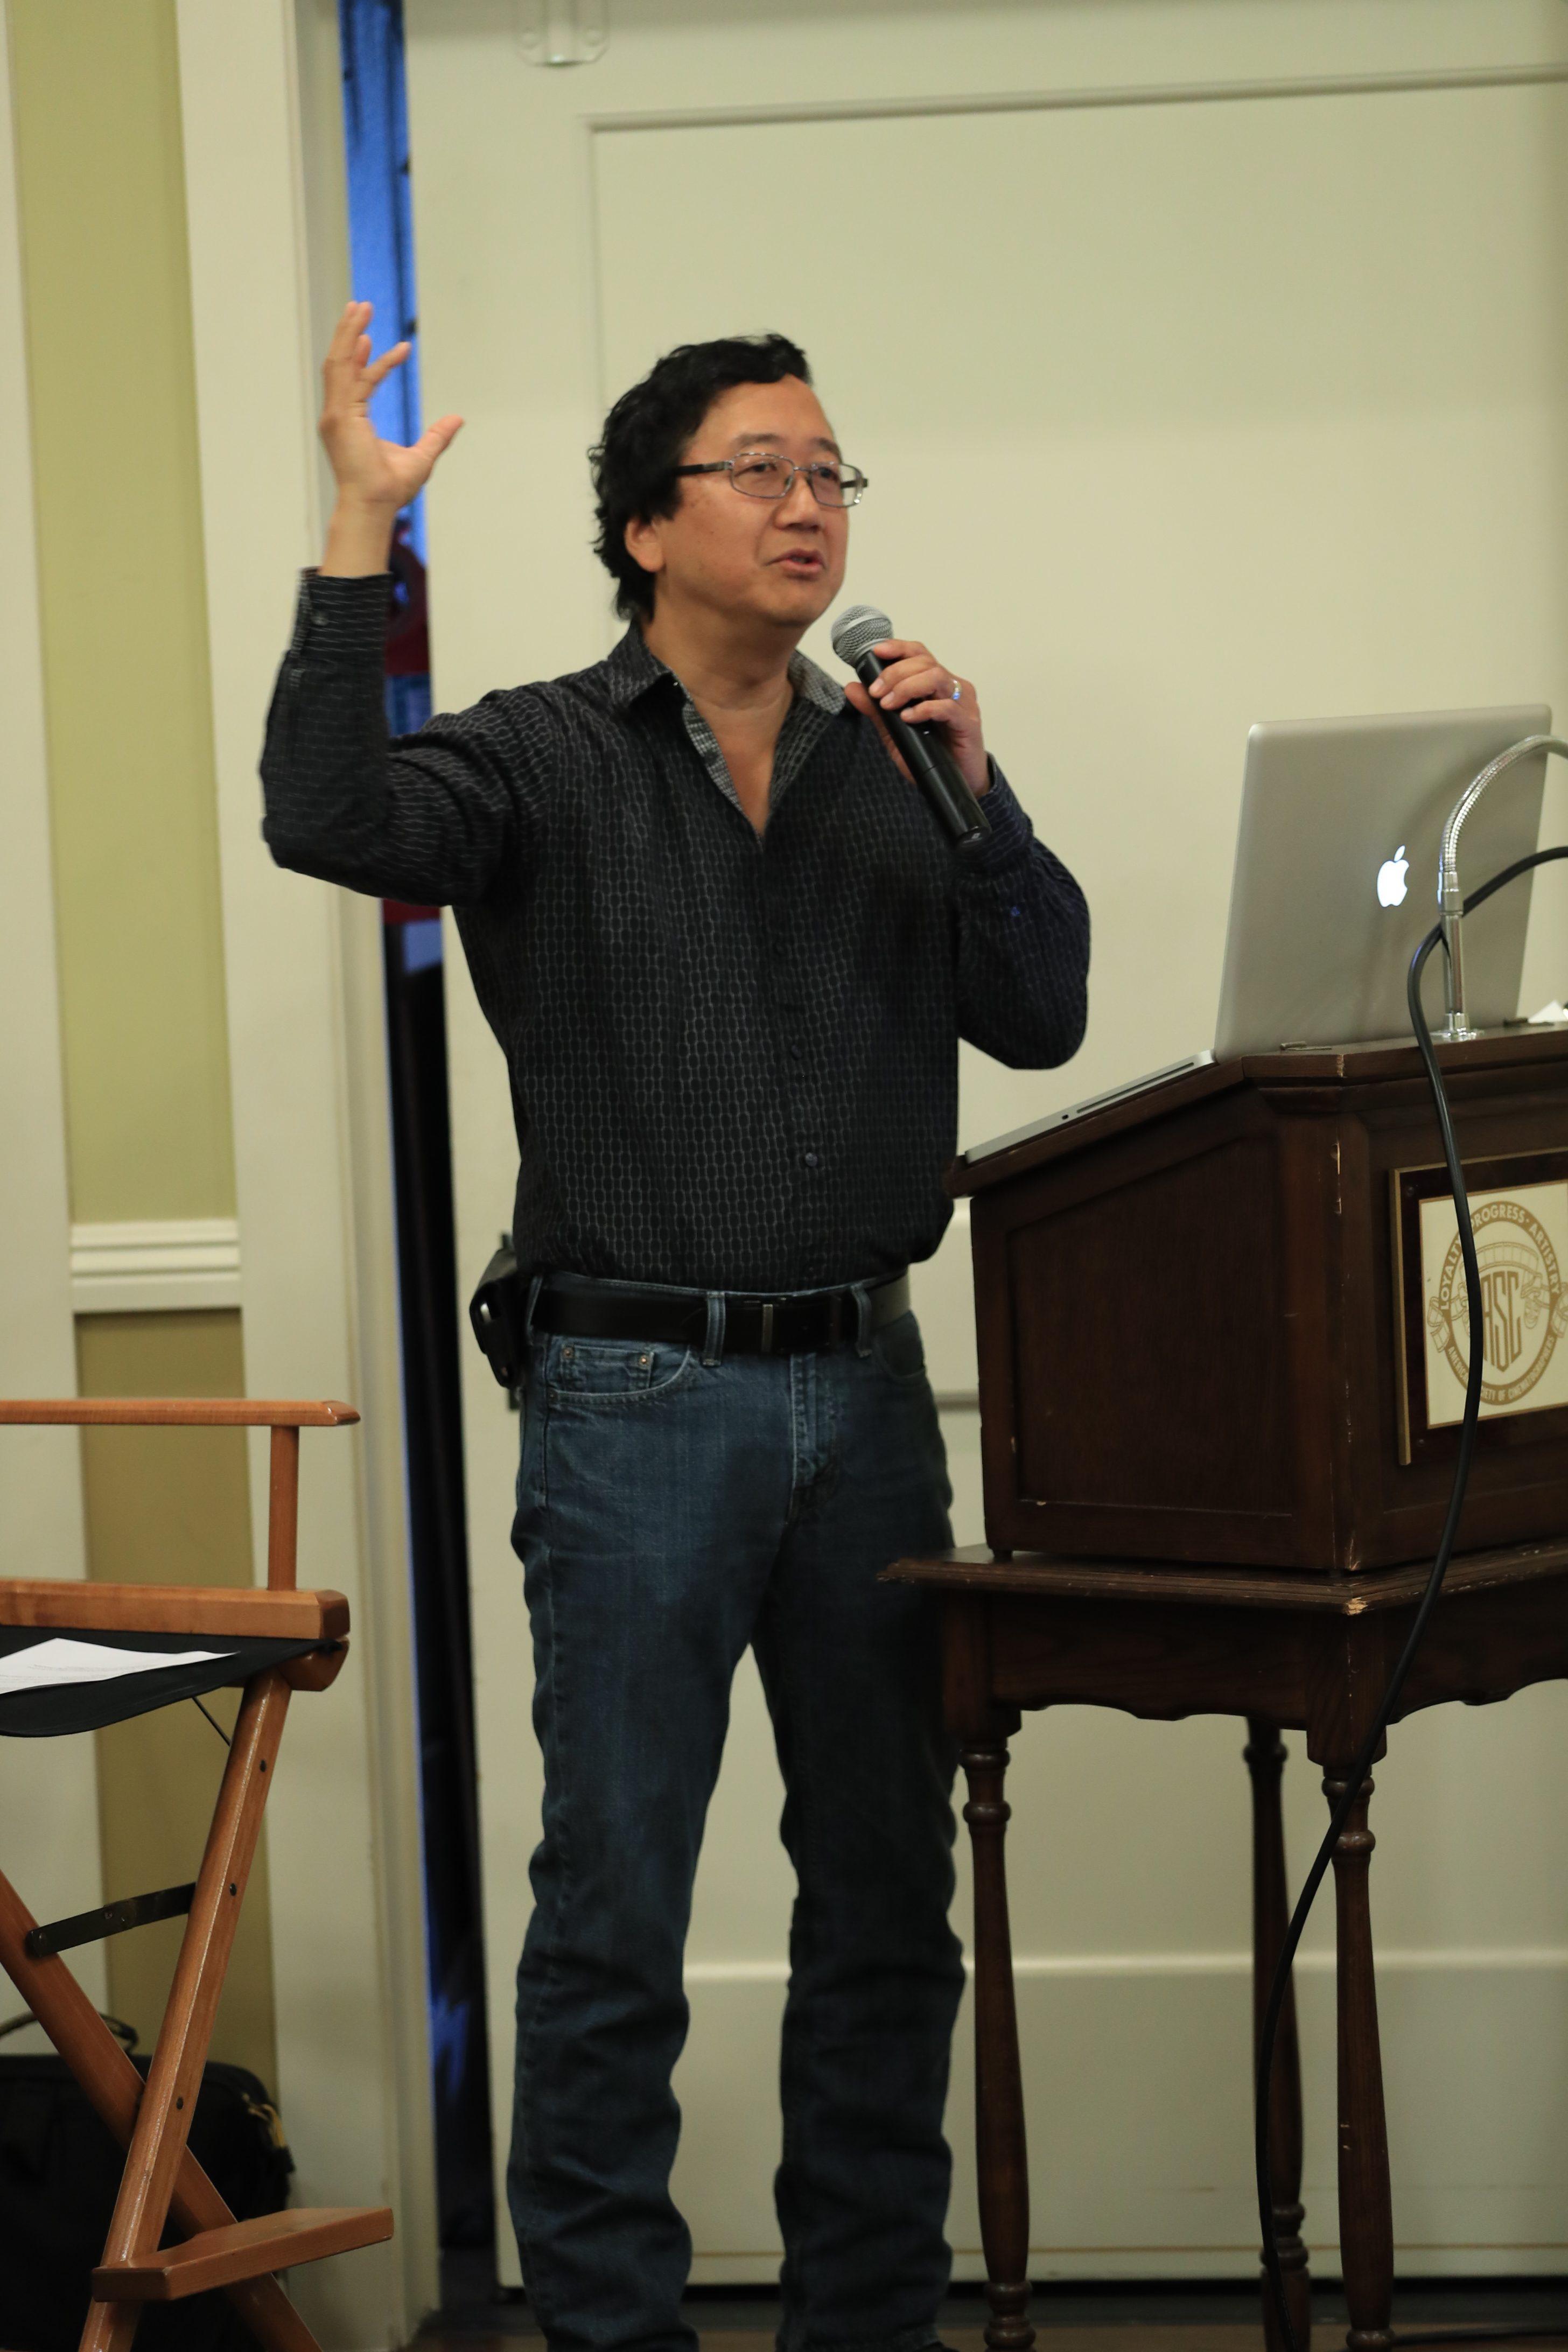 Michael Goi, ASC discussing his work on American Horror Story at ICS2016. Photo by James Neihouse, ASC